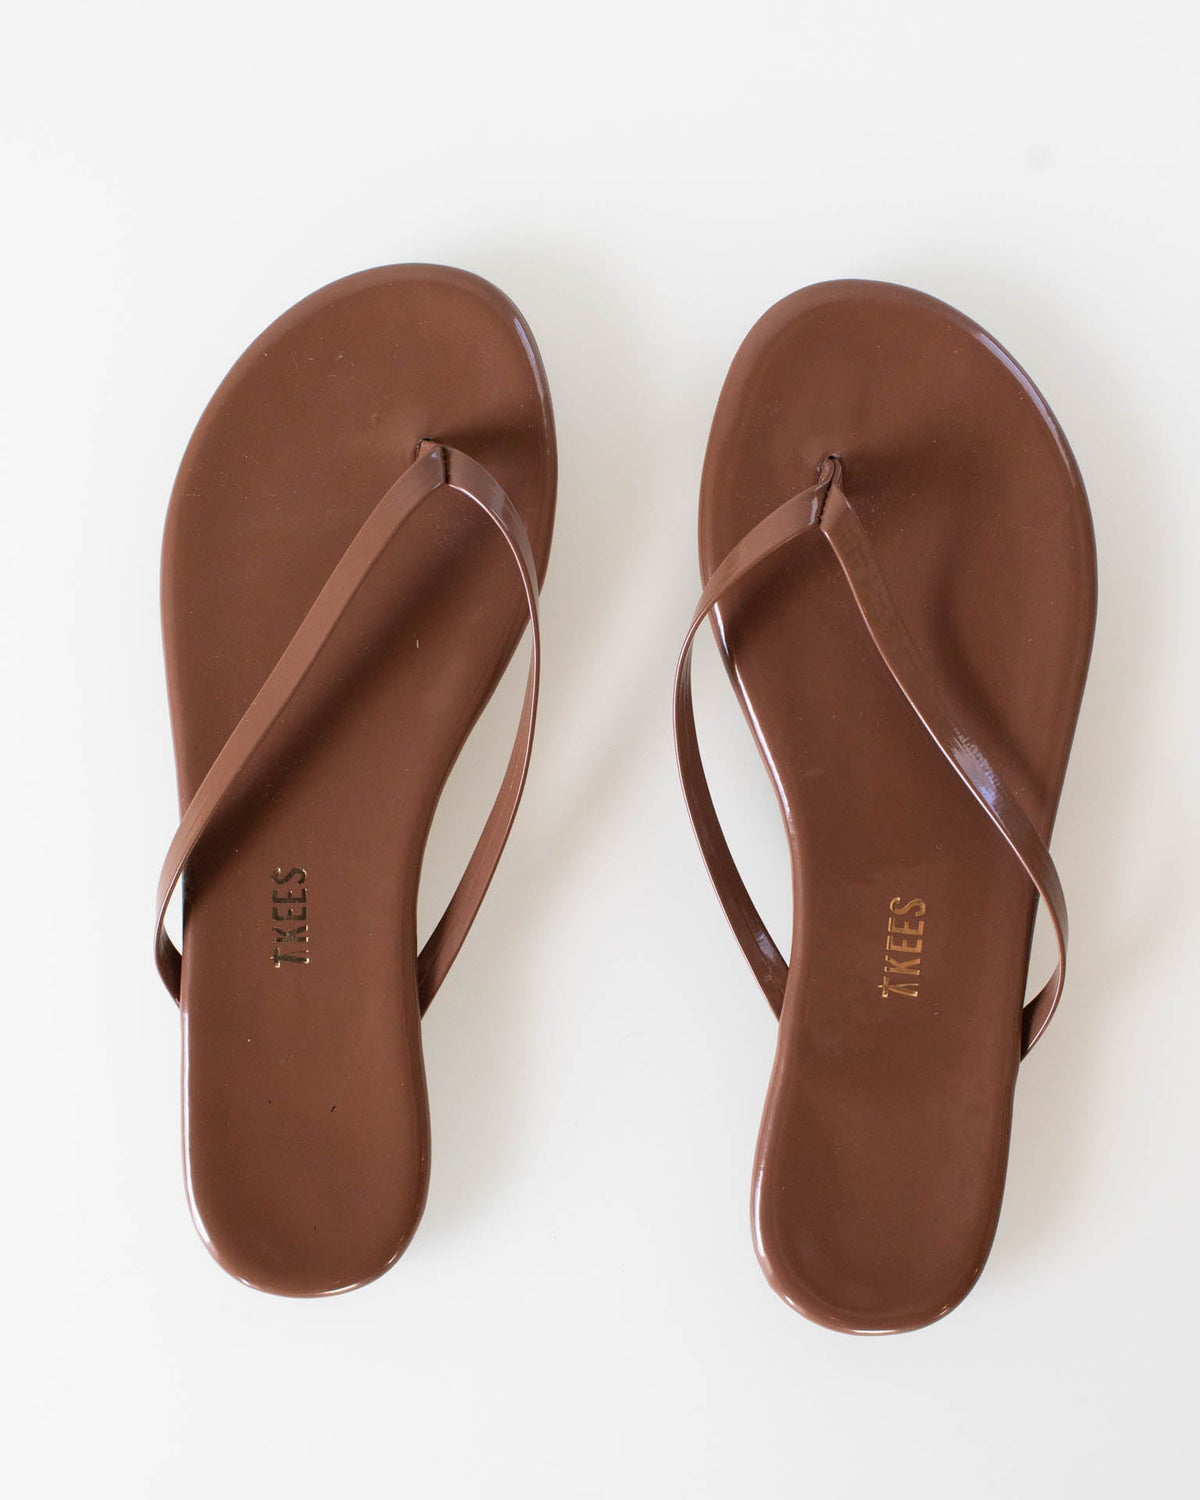 Tkees Shoes Glosses Flip Flop in Heat Wave